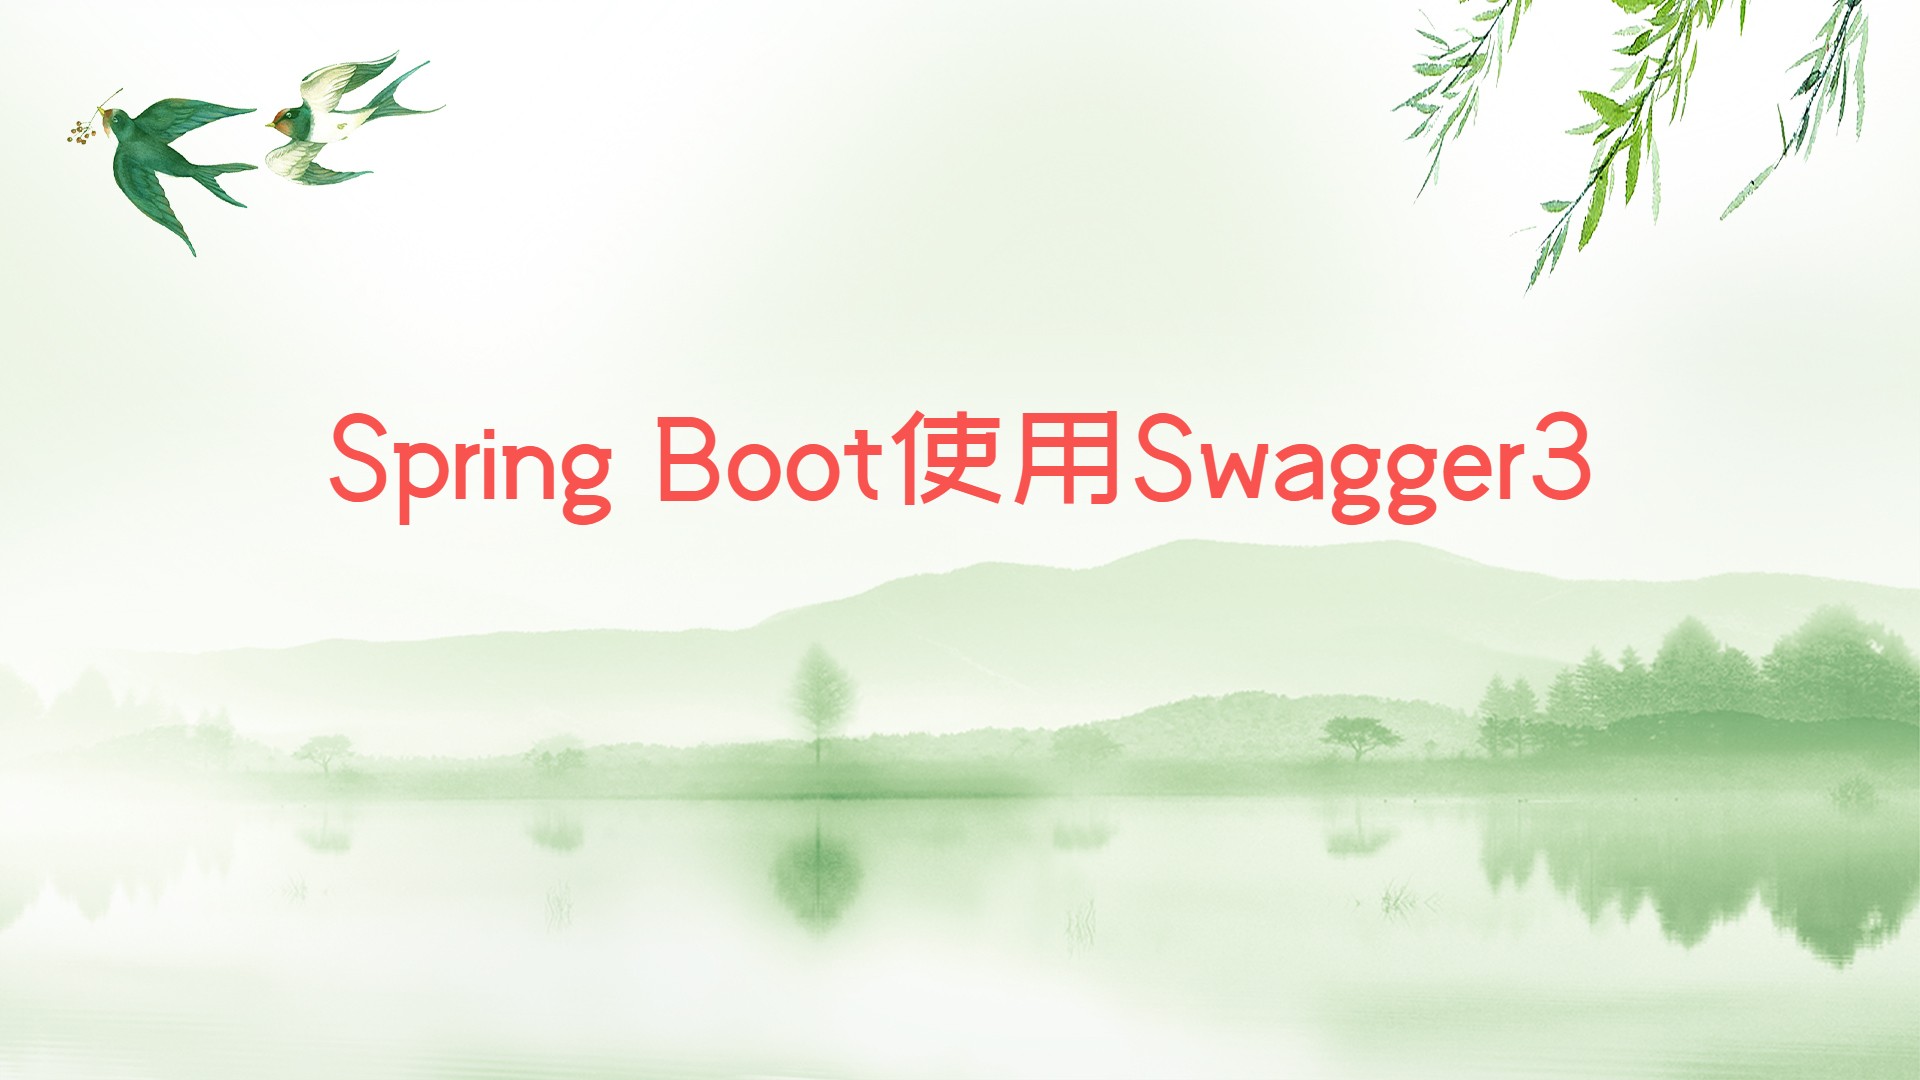 Spring Boot使用Swagger3